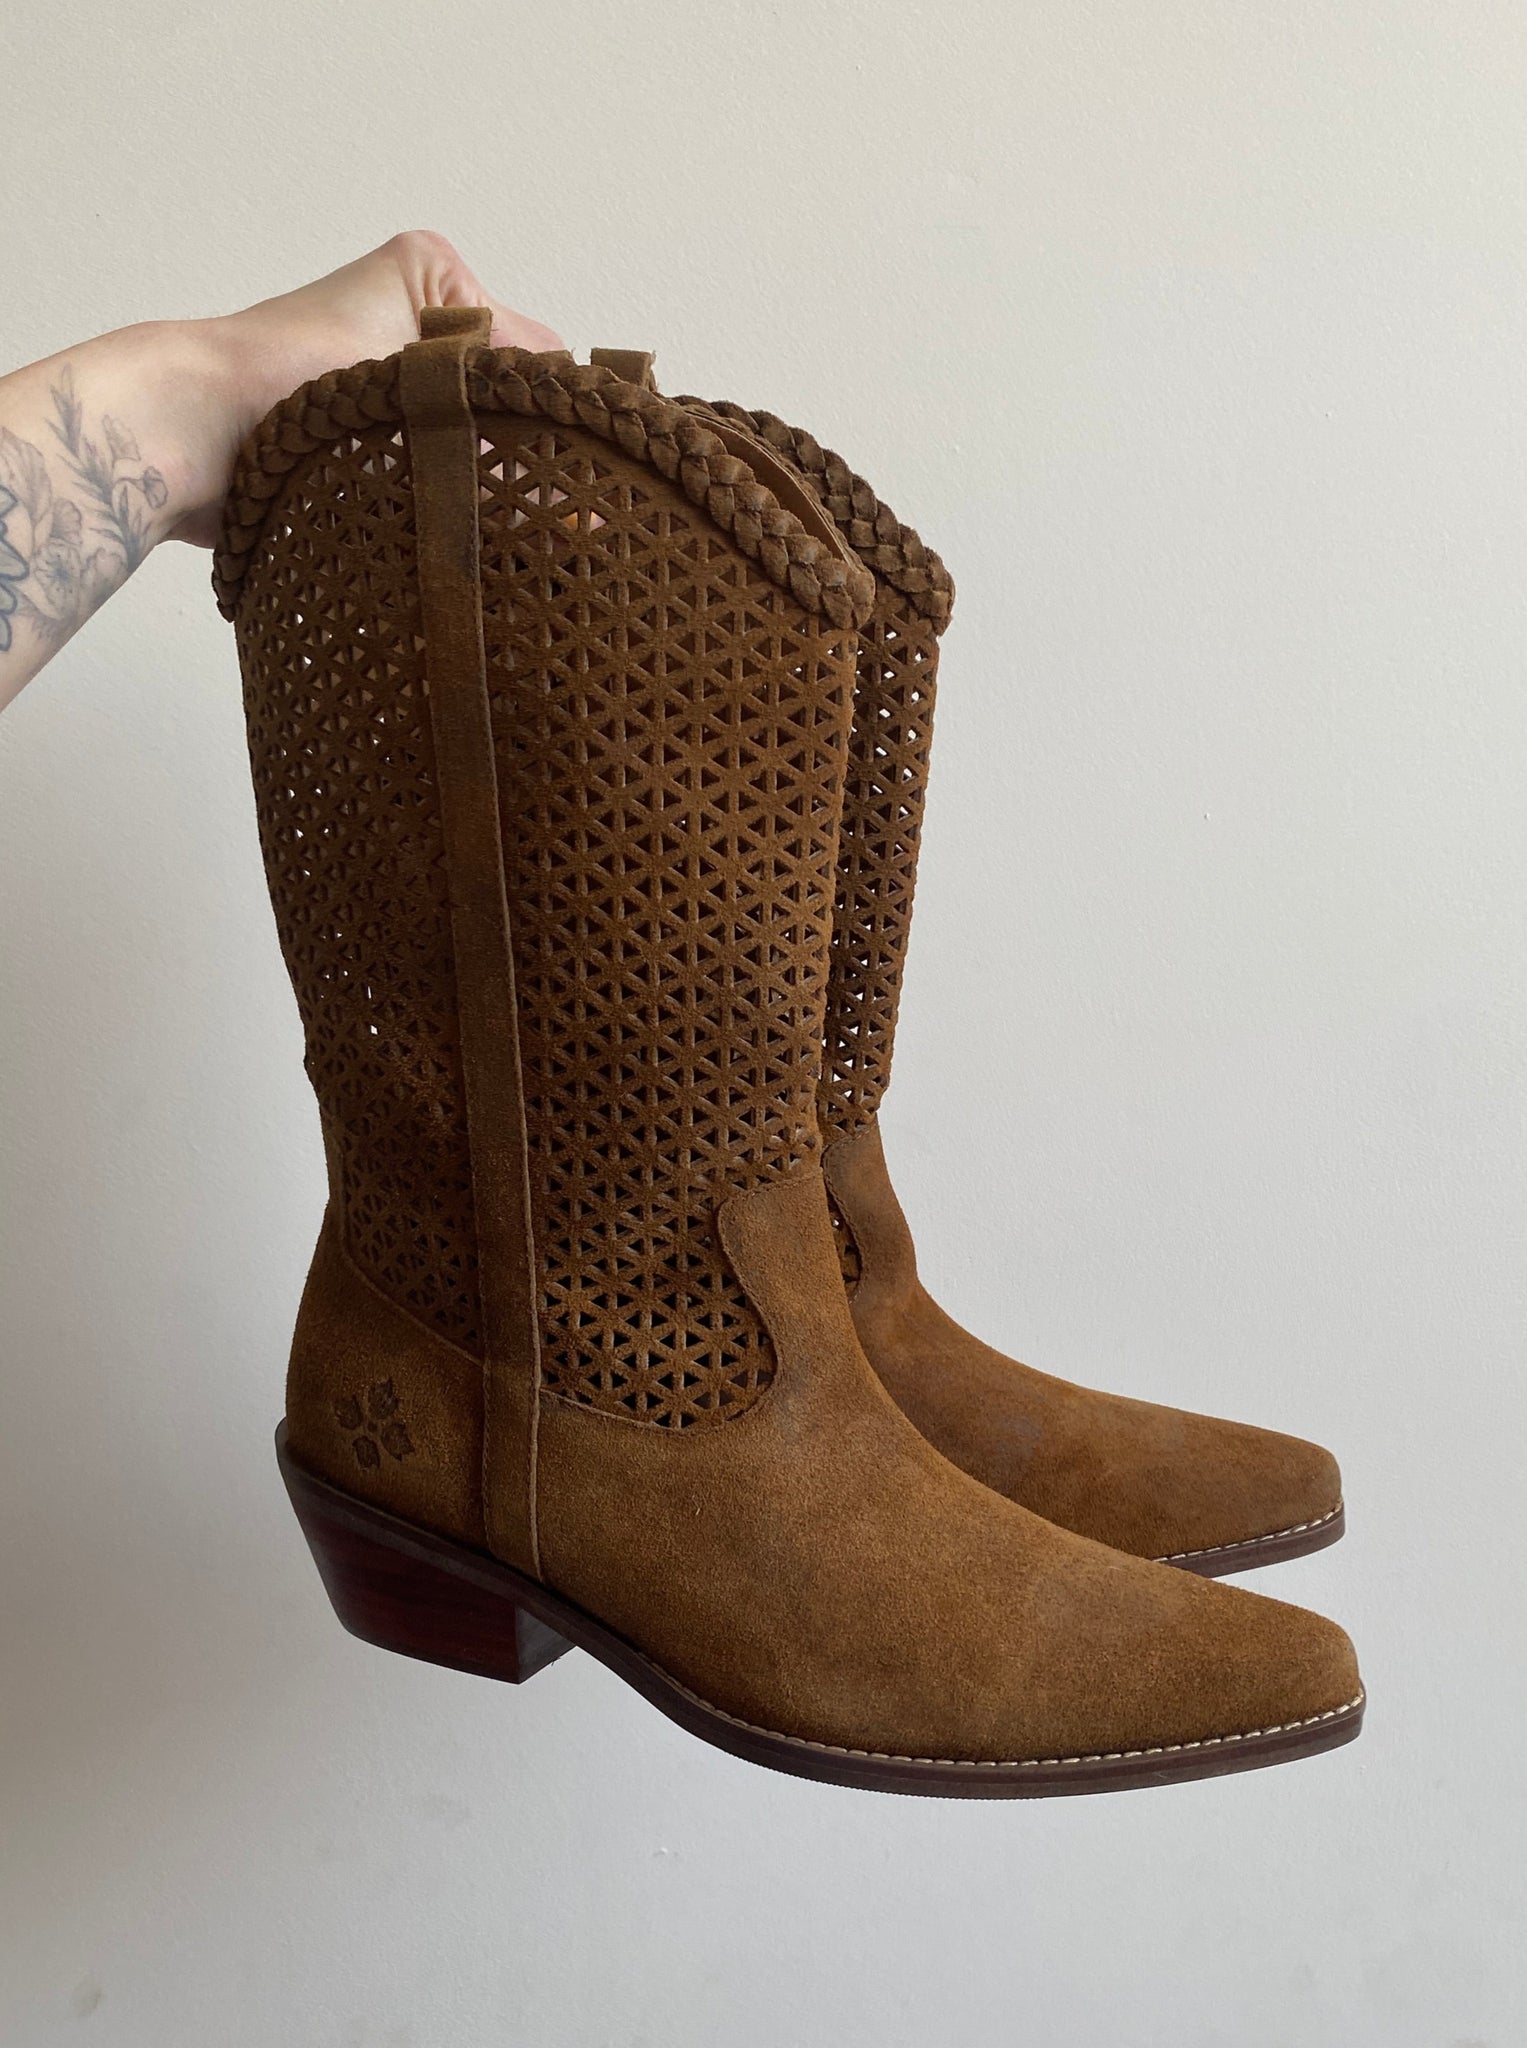 Patricia Nash Brown Suede Cowgirl Boots (U.S. Women 9)